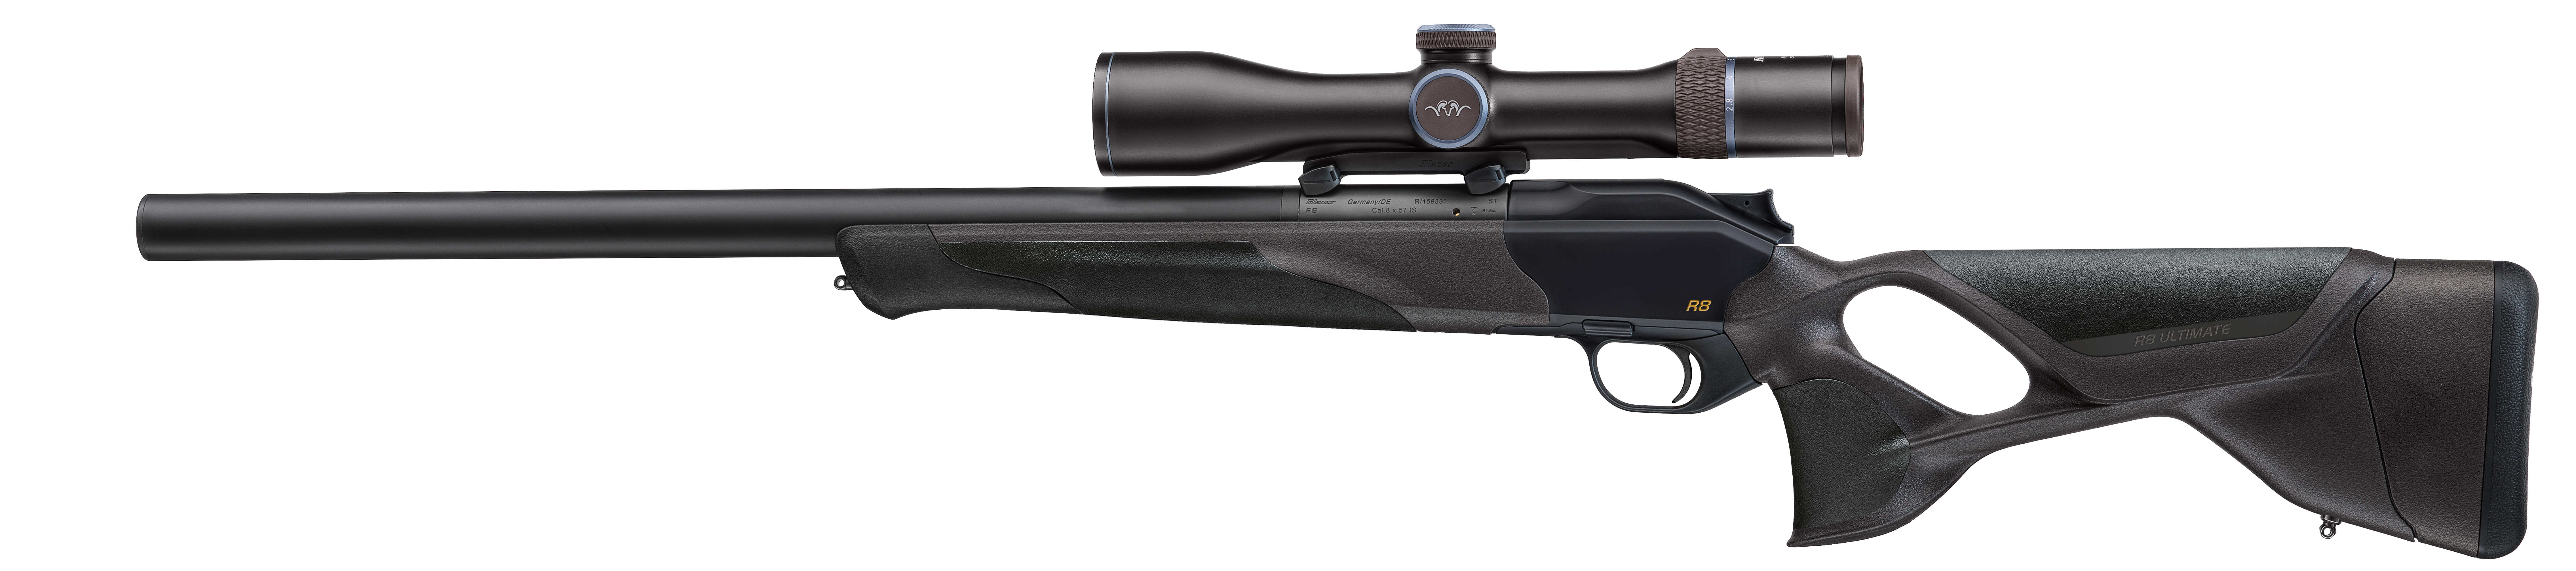 Blaser R8 Ultimate Silence | F.A.S.T. Onlineshop